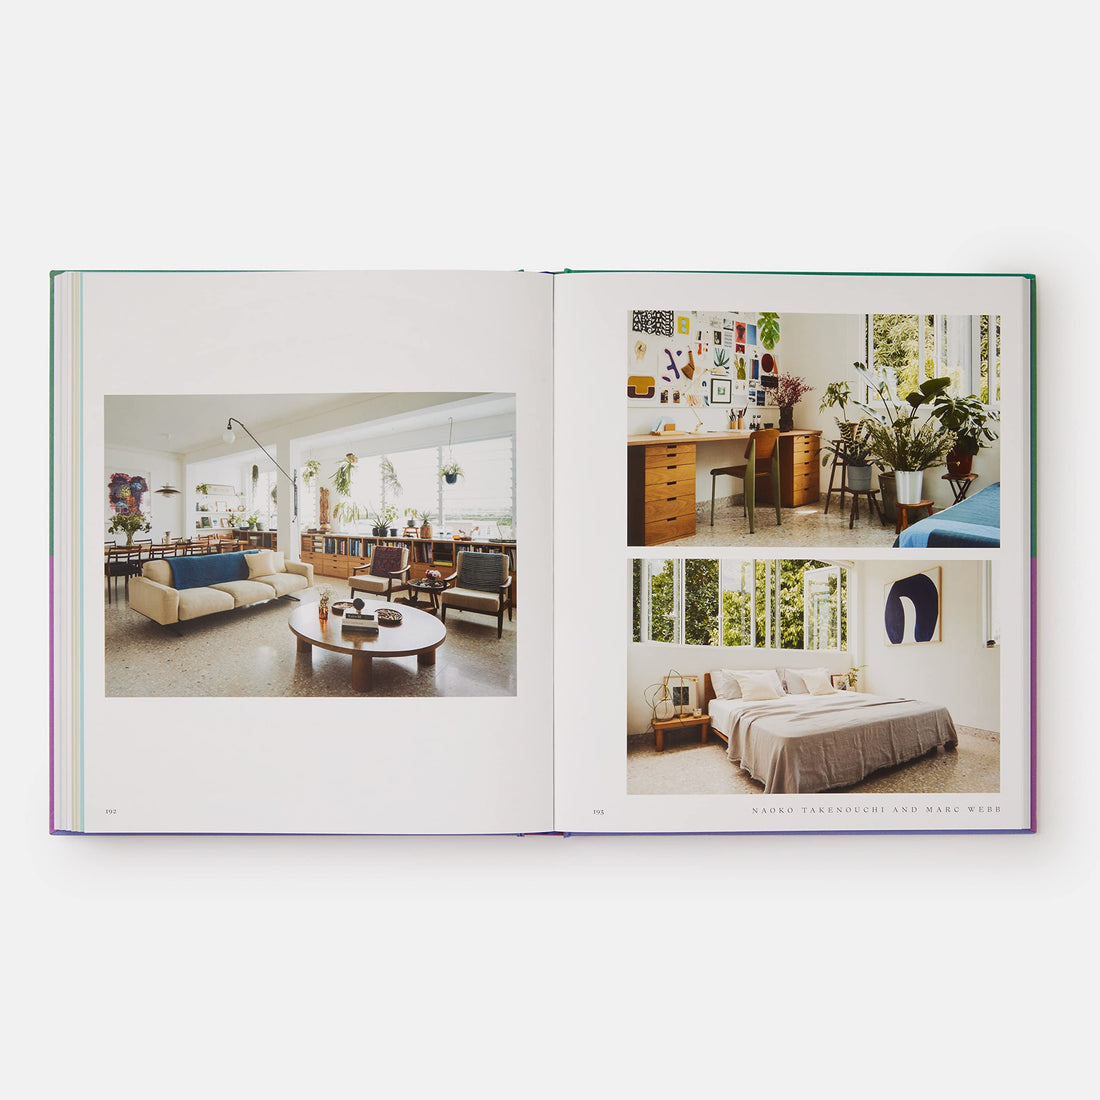 Inside: At Home with Great Designers